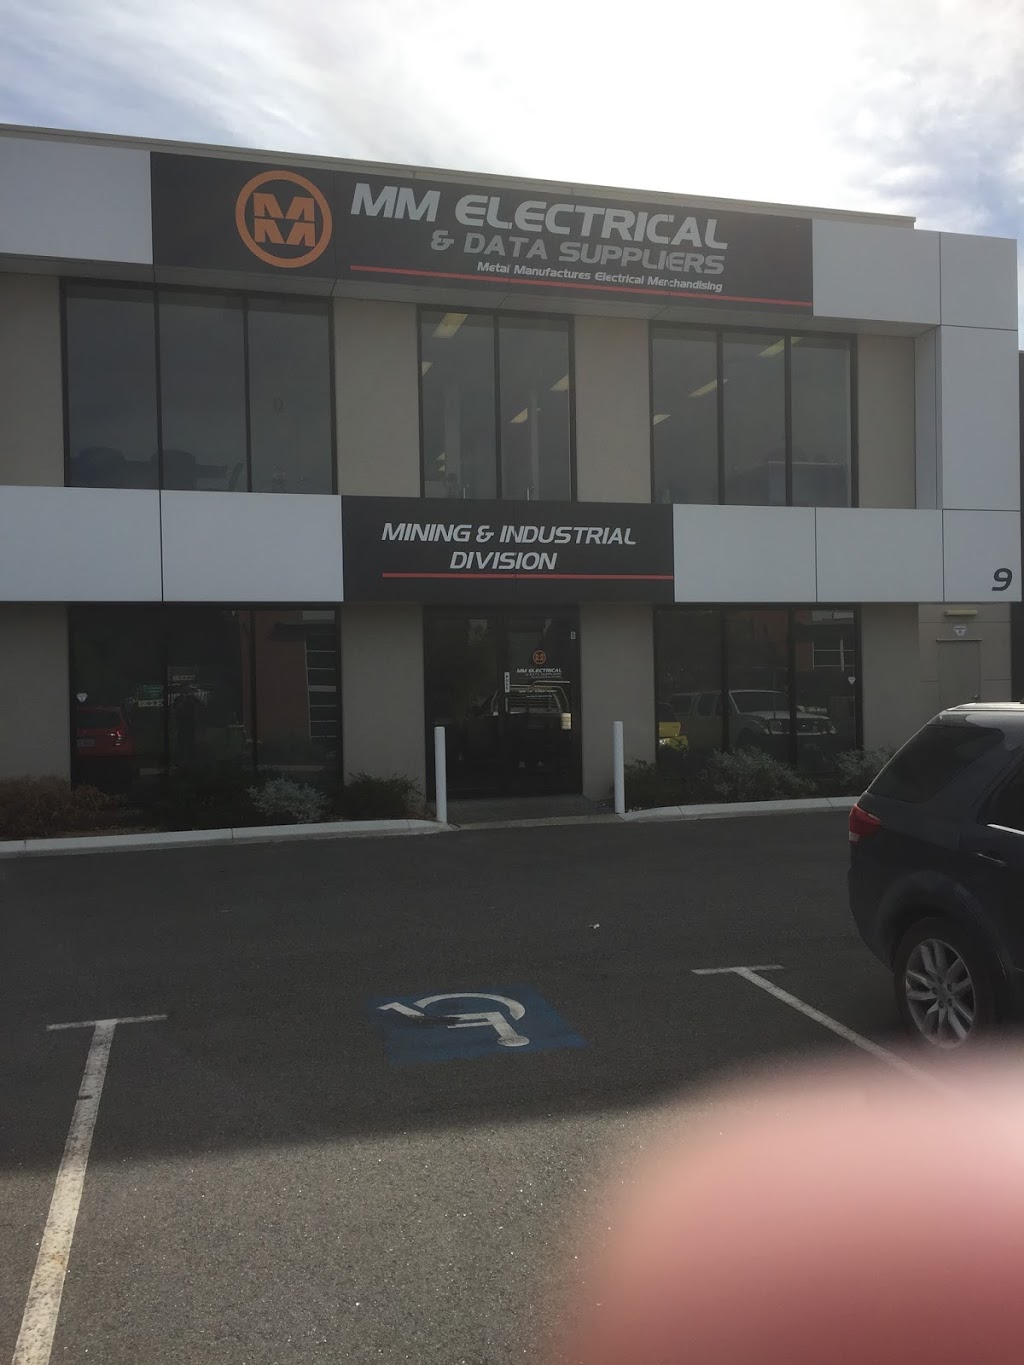 MM Electrical Merchandising (MMEM) (9 Hydro Rise) Opening Hours